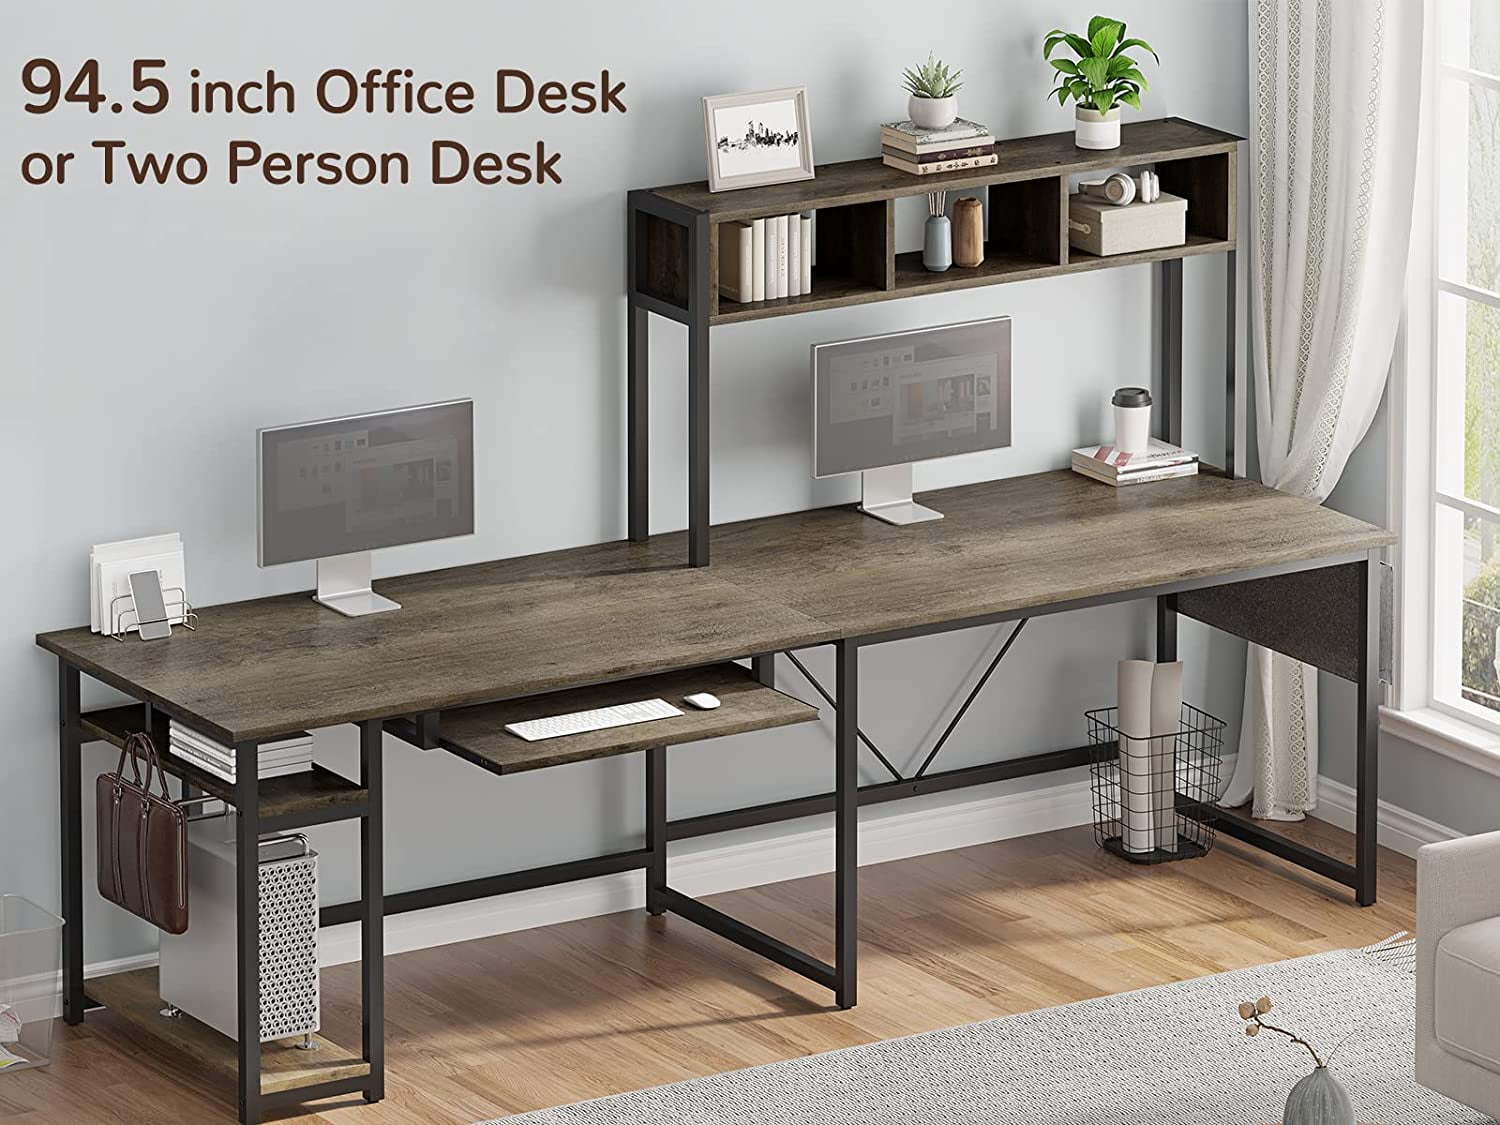 94.5 Home Office Desks, Computer Gaming Desk with Storage, LED Lights,  Power Strip with USB, Keyboard Tray & Monitor Stand, Extra Long Double Desk  for 2 Person, Rustic Brown 